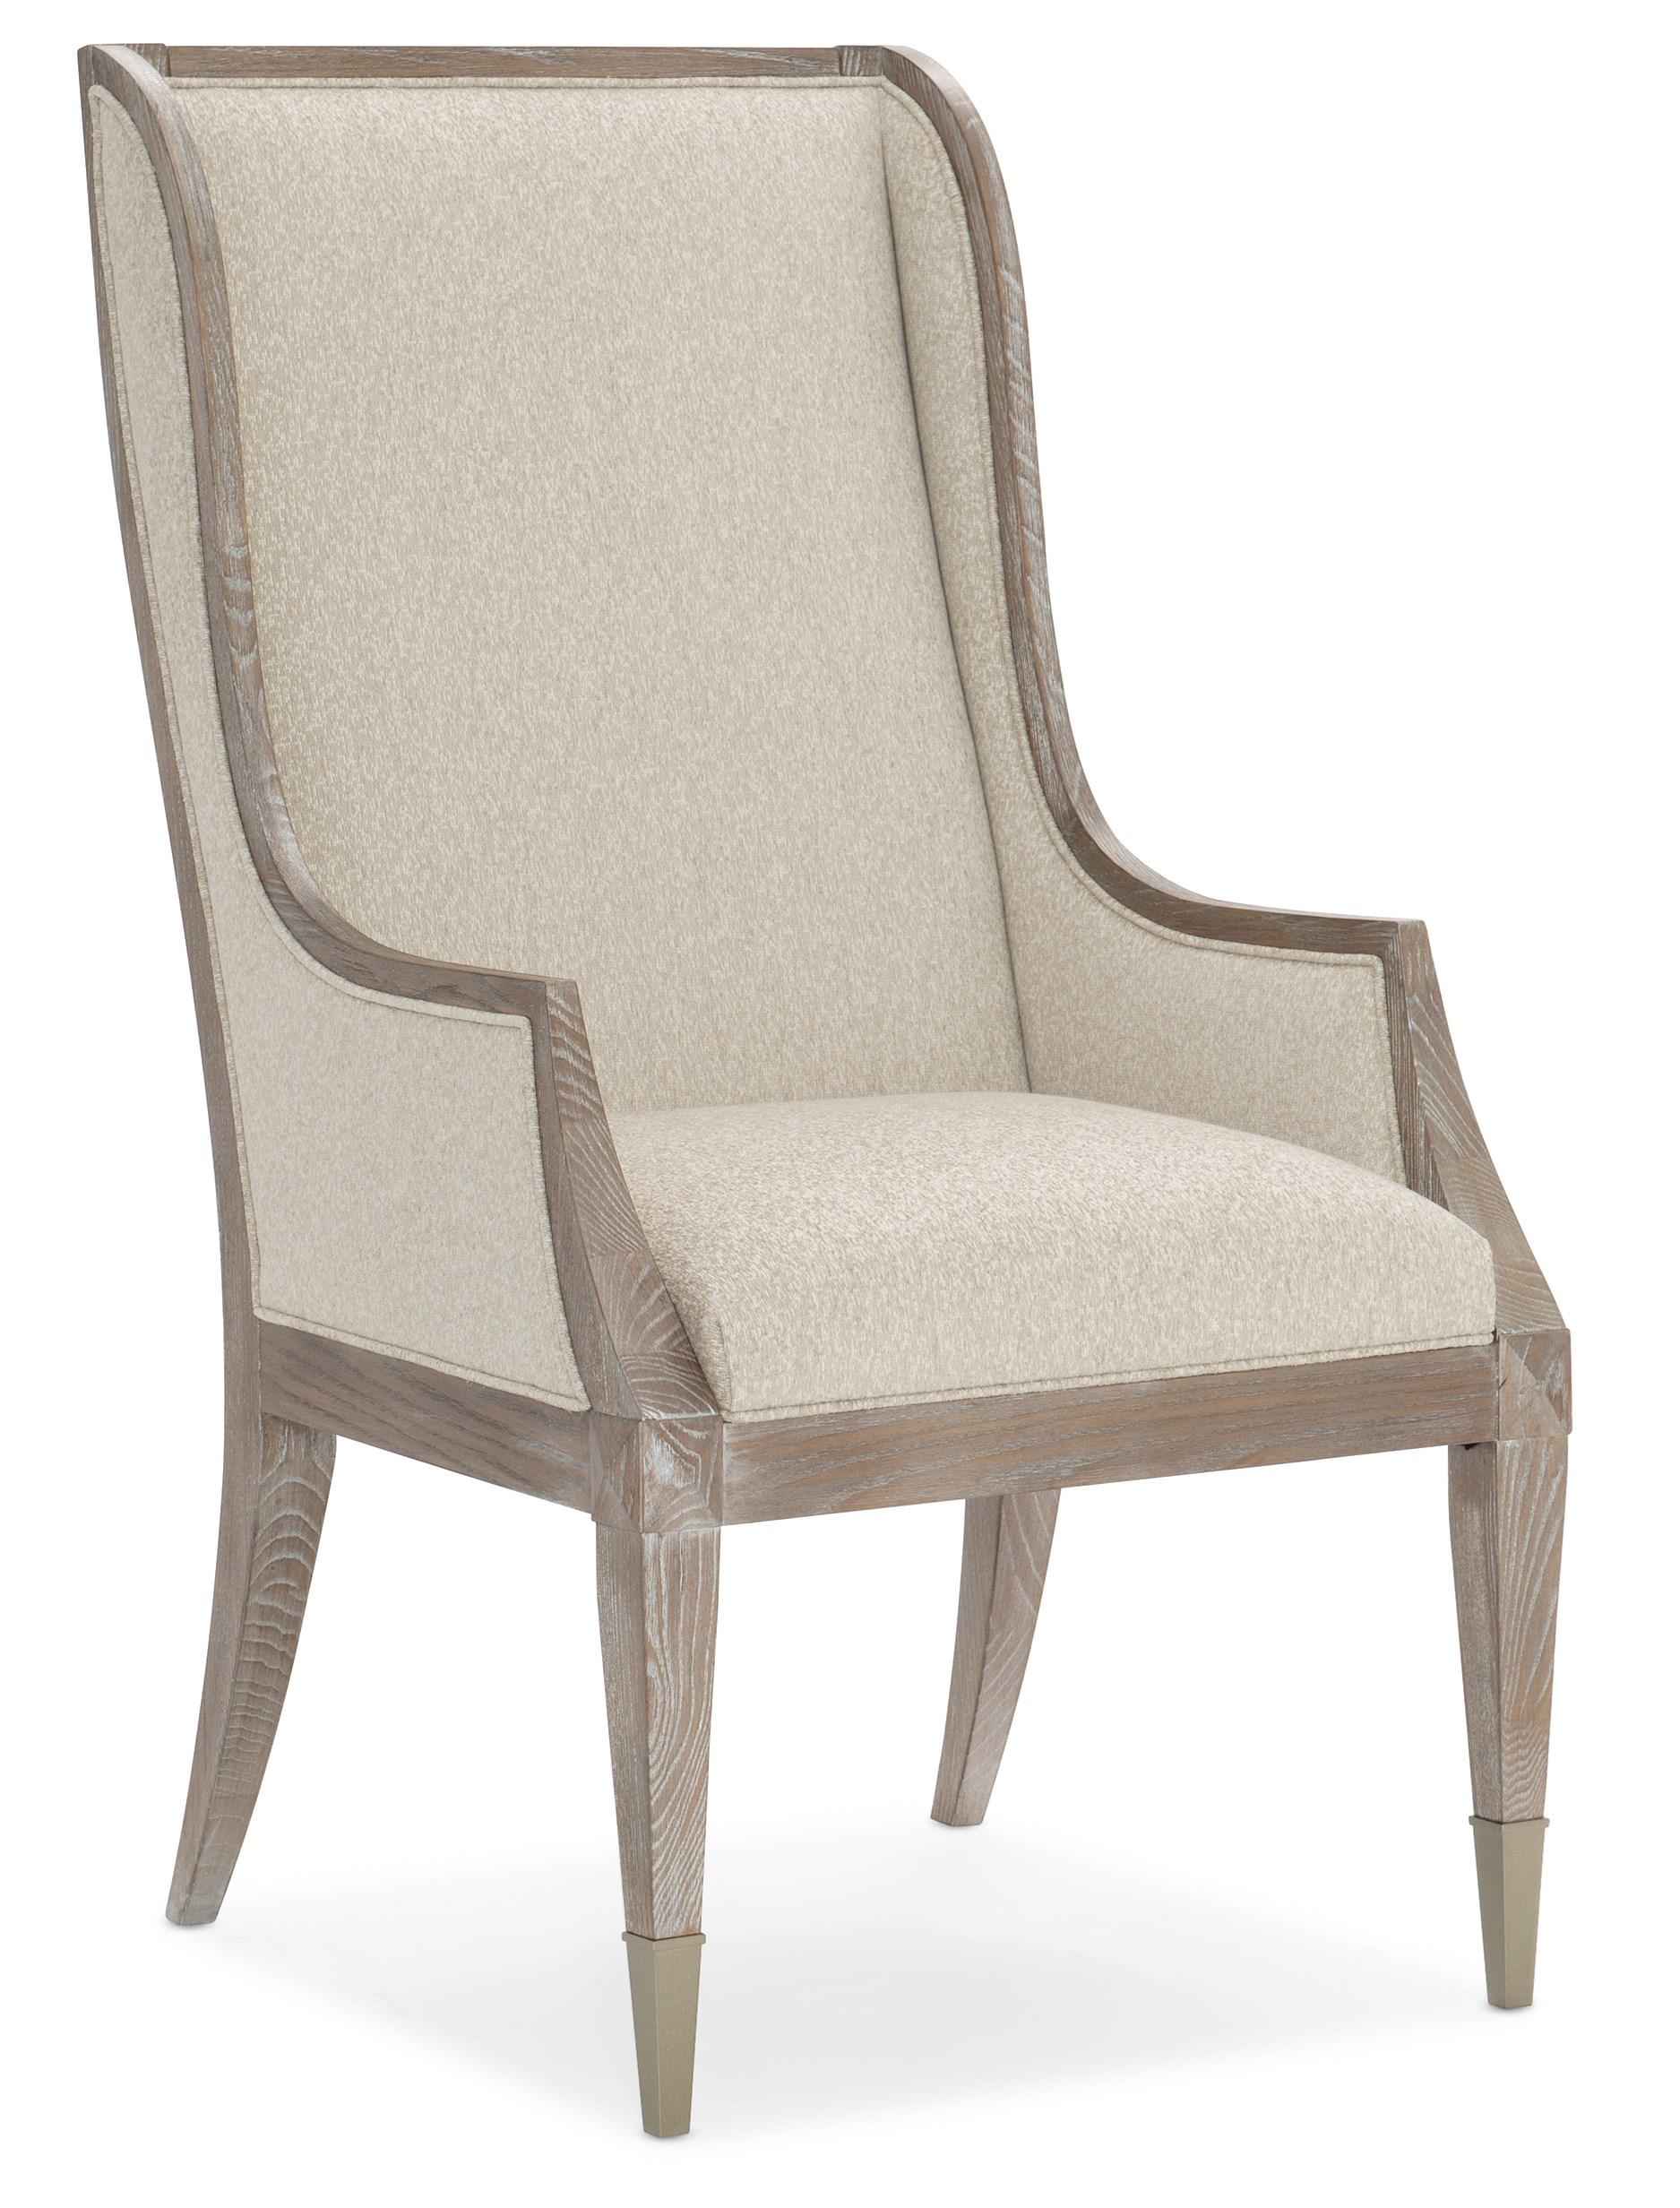 Classic Dining Chair Set OPEN ARMS ARM CHAIR CLA-019-273-Set-2 in Light Gray, Driftwood Fabric